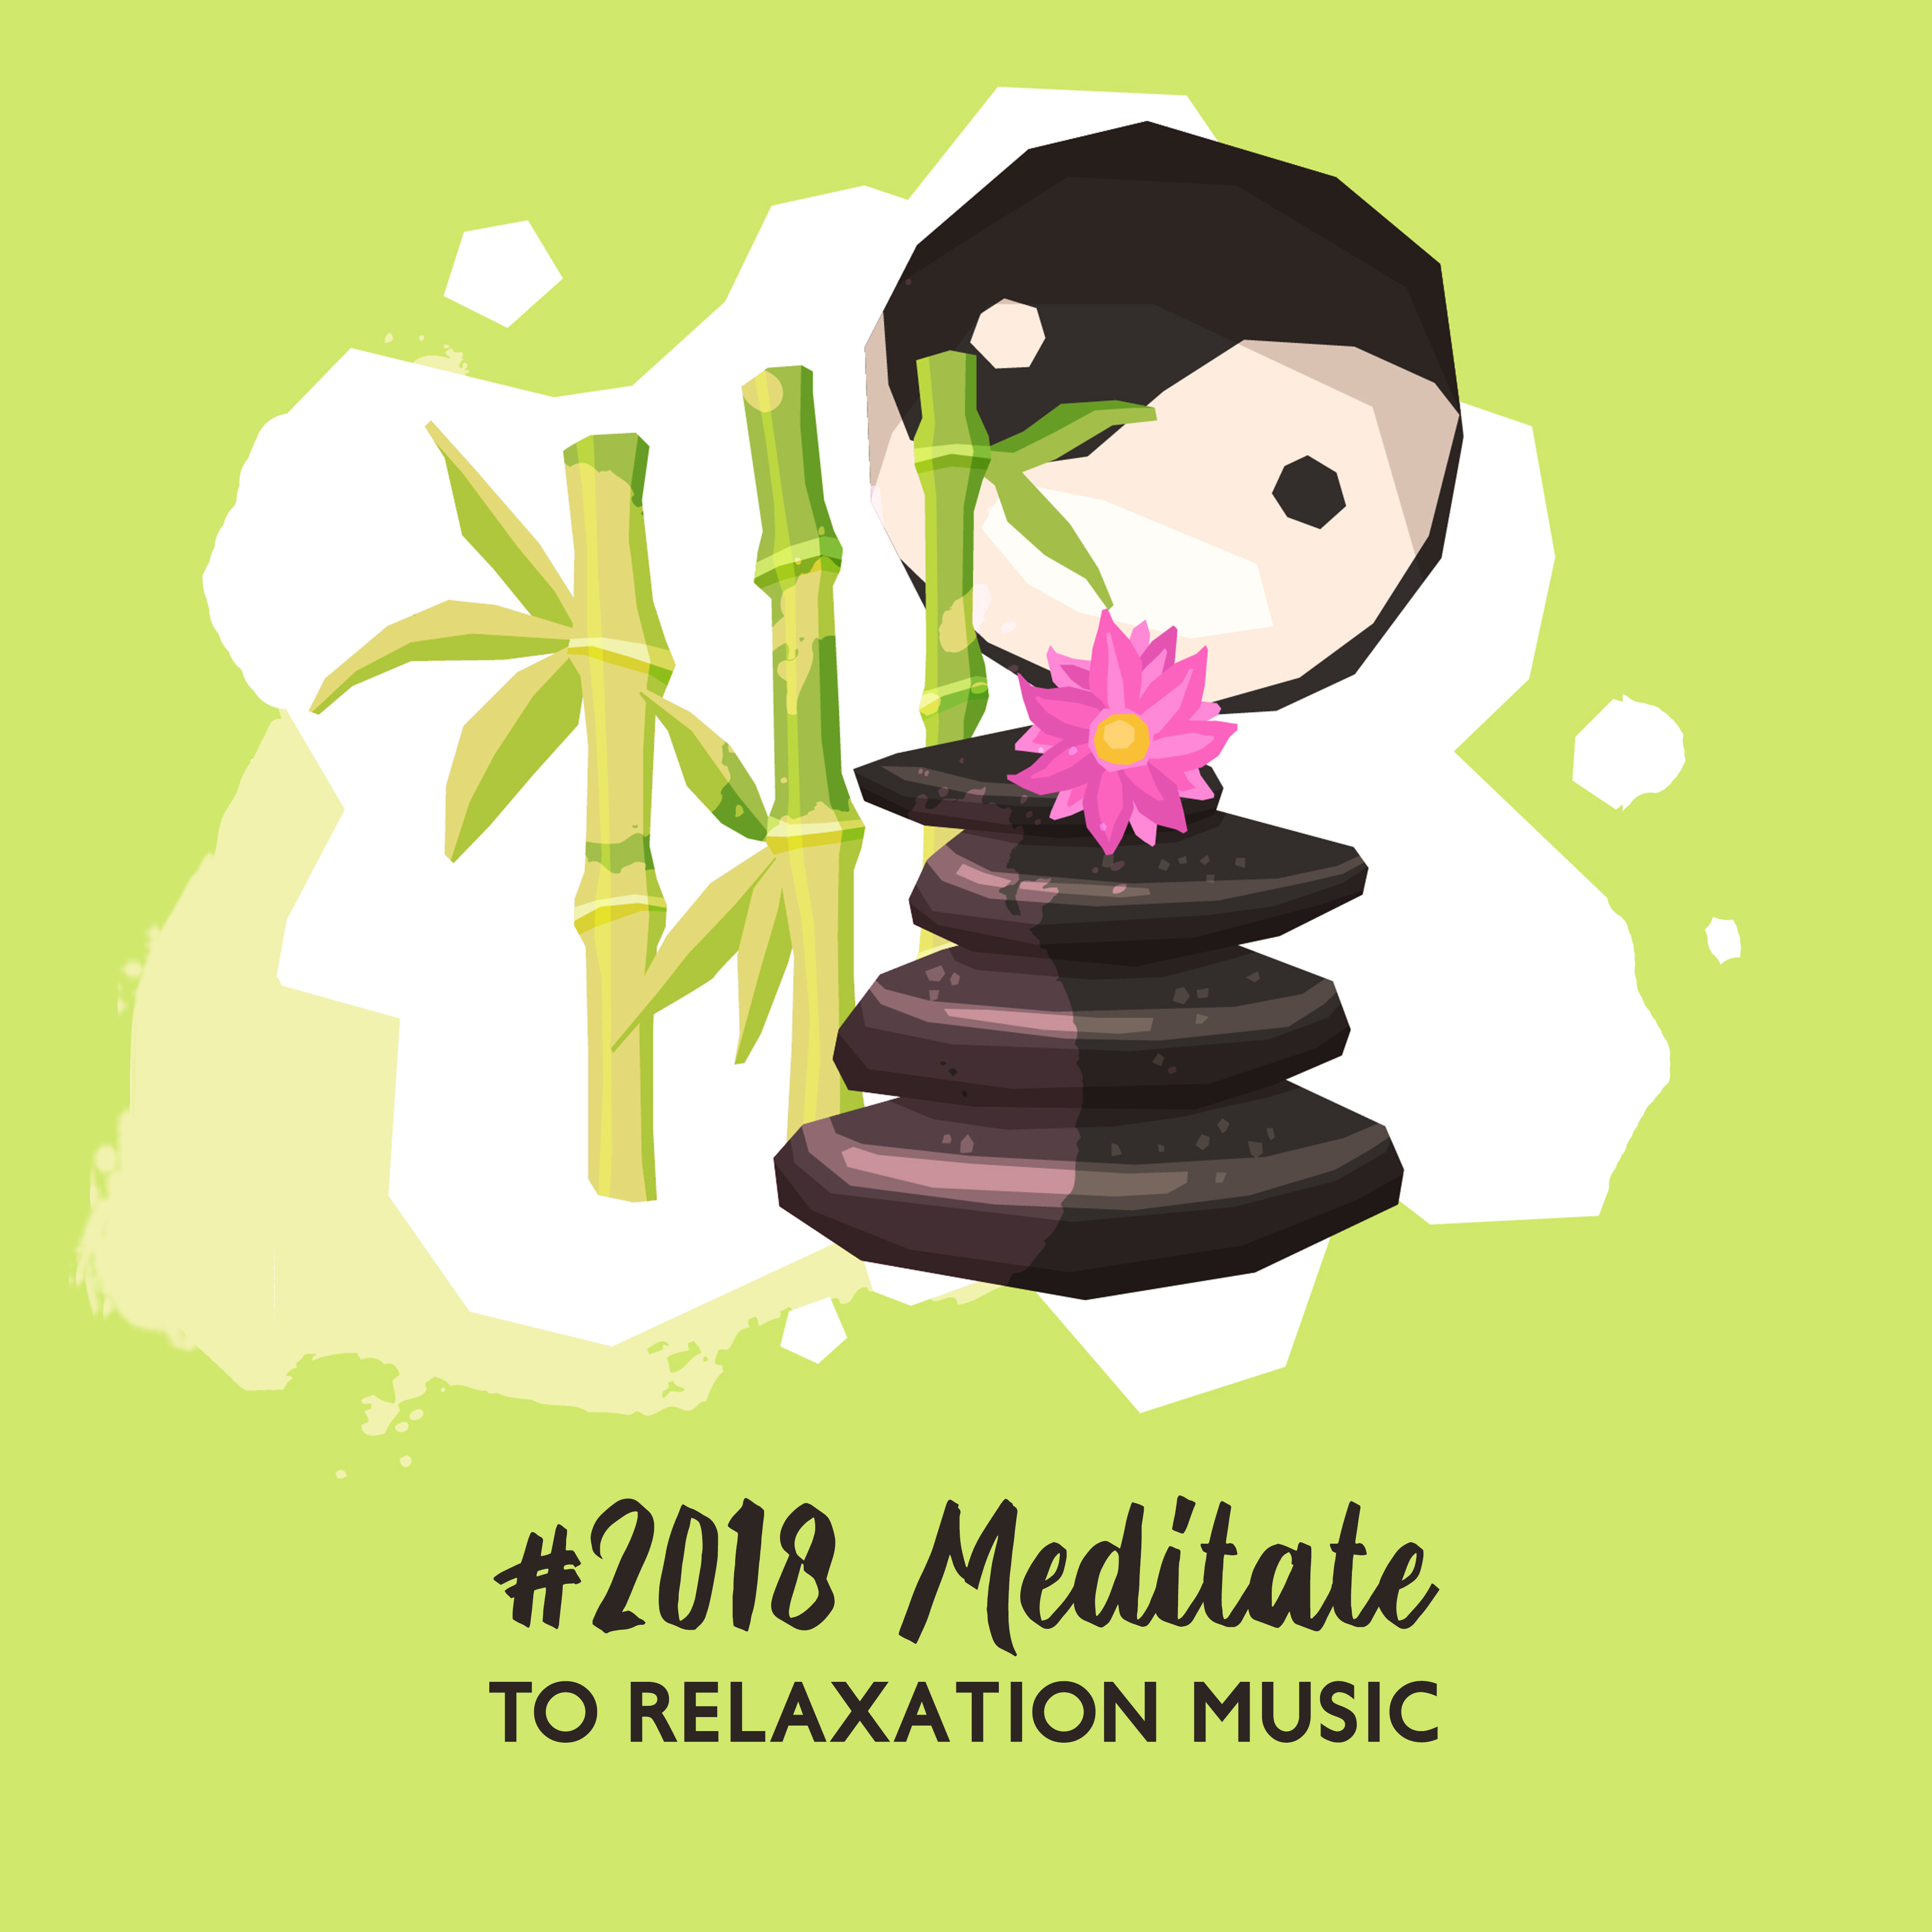 #2018 Meditate to Relaxation Music